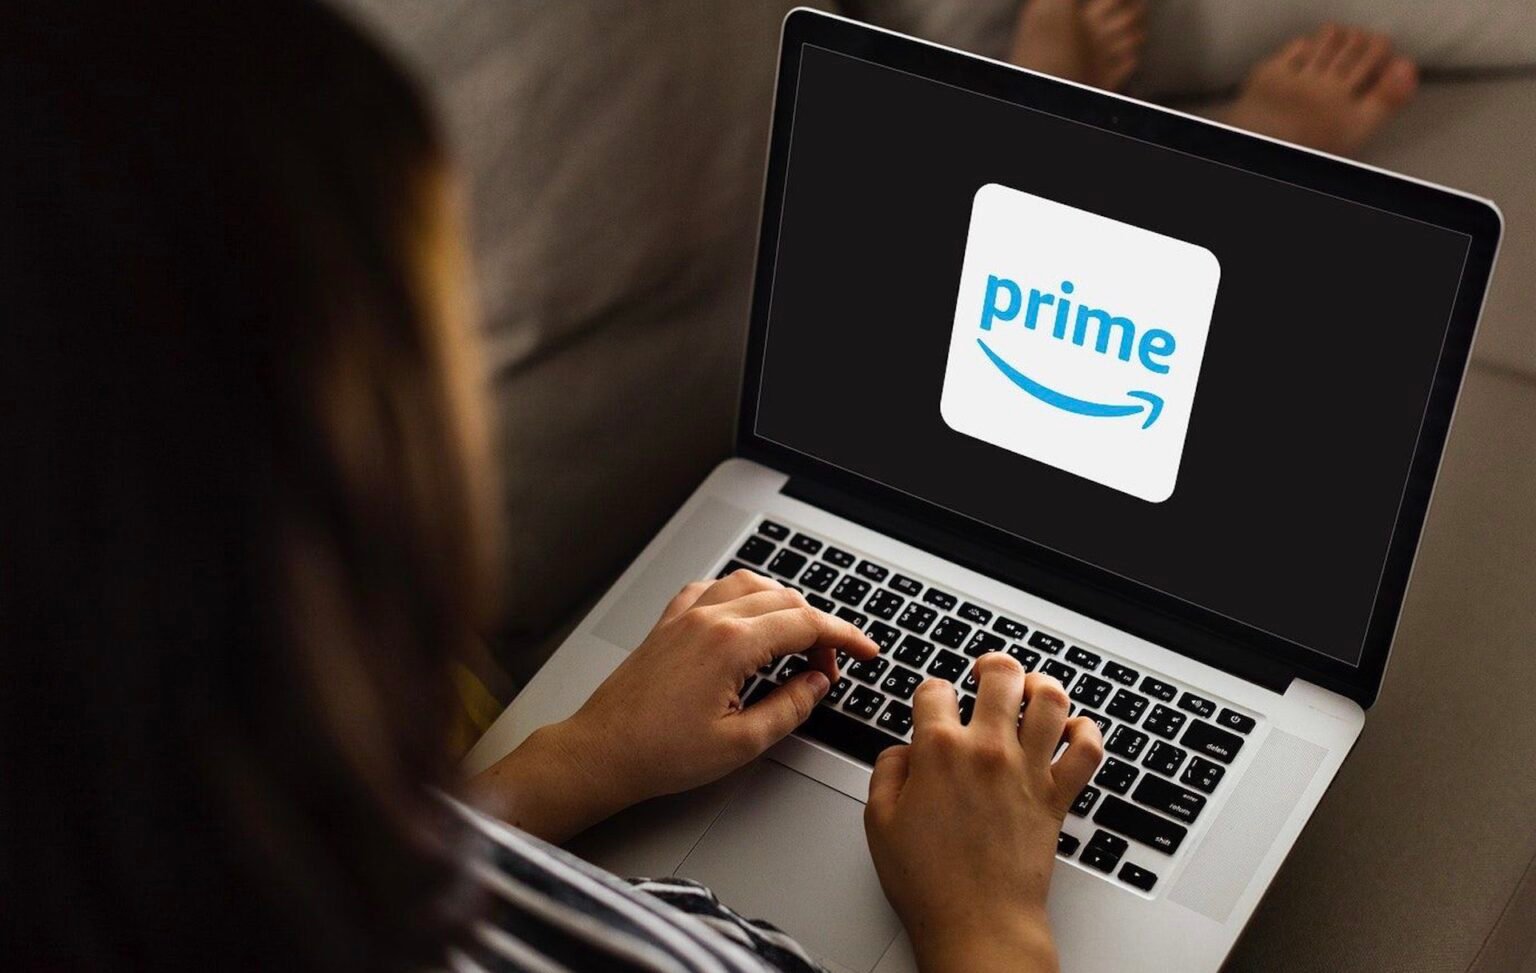 Films are perfect for broadening your horizons! We've surfed the web and found some cool new movies coming to Amazon Prime. Check them out here!